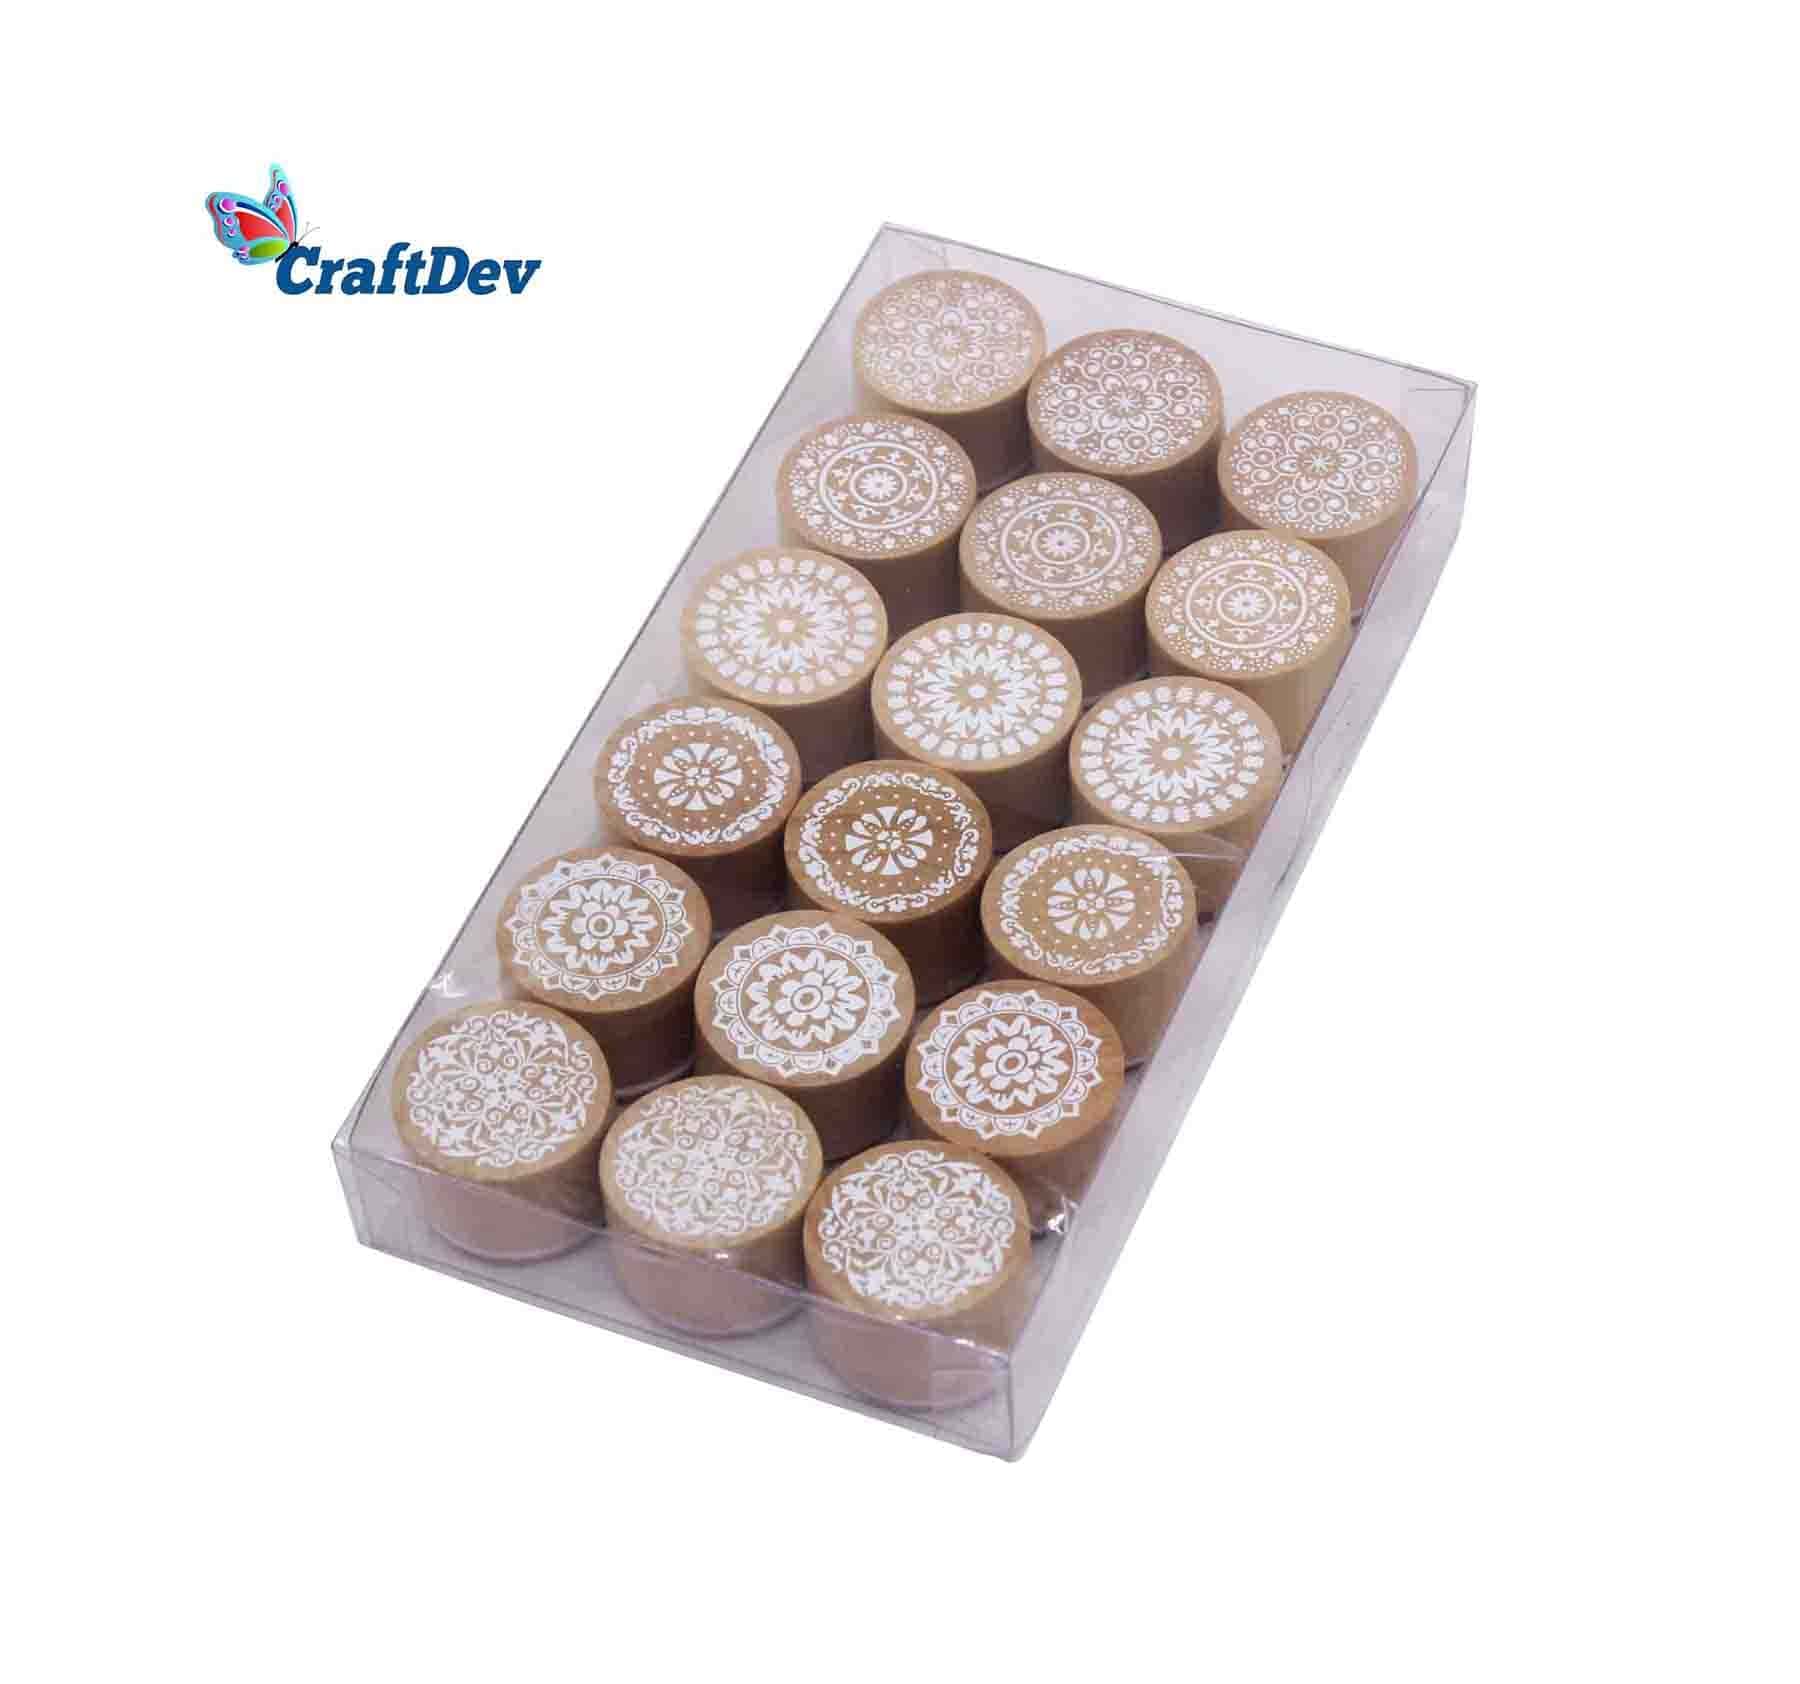 MG Traders Wooden Stamps Wooden Stamp Round Designs 18 Pcs (Wsrd)